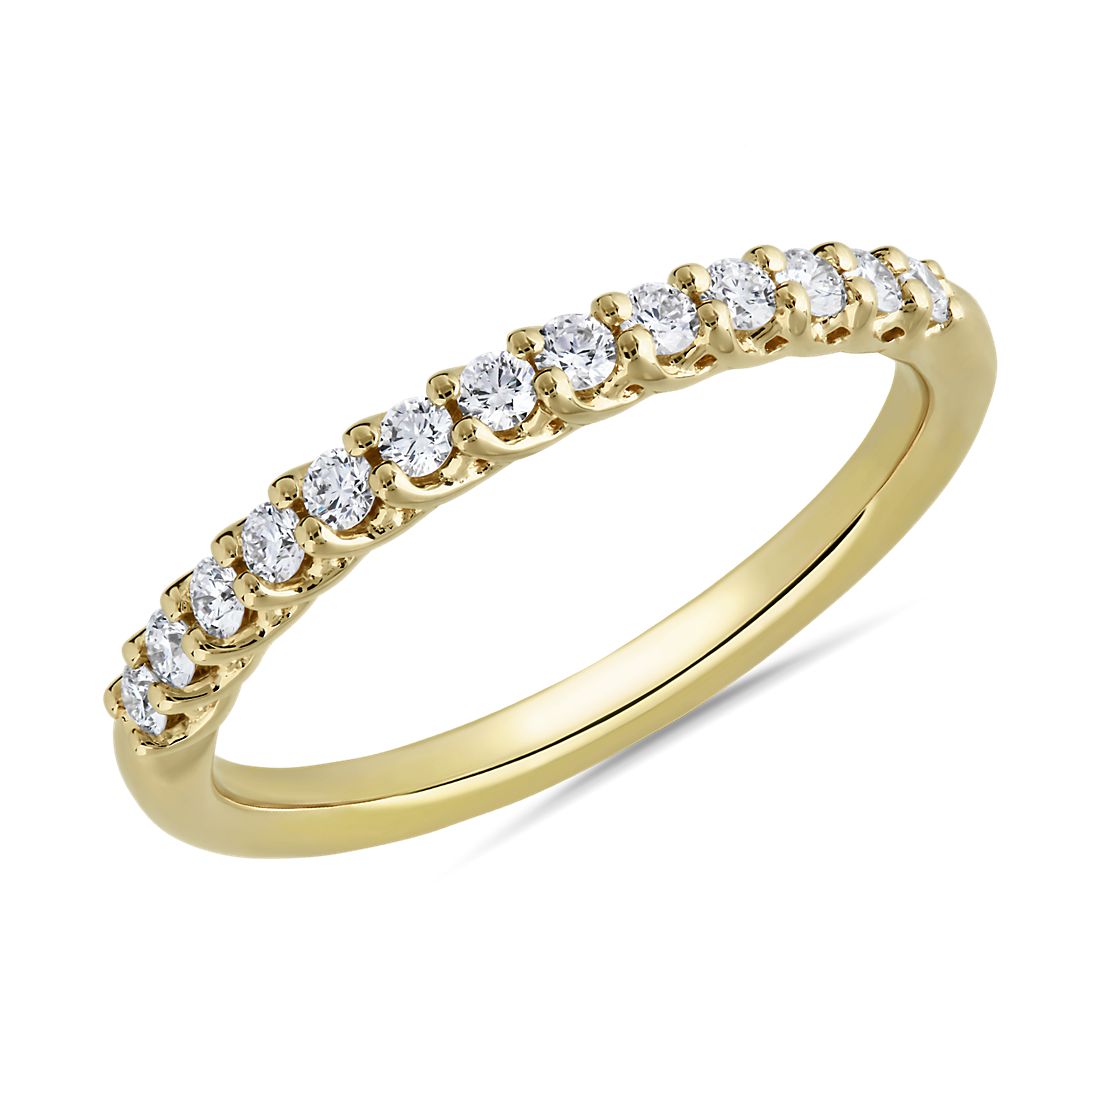 Tessere Weave Diamond Anniversary Band in 14k Yellow Gold (0.24 ct. tw.)